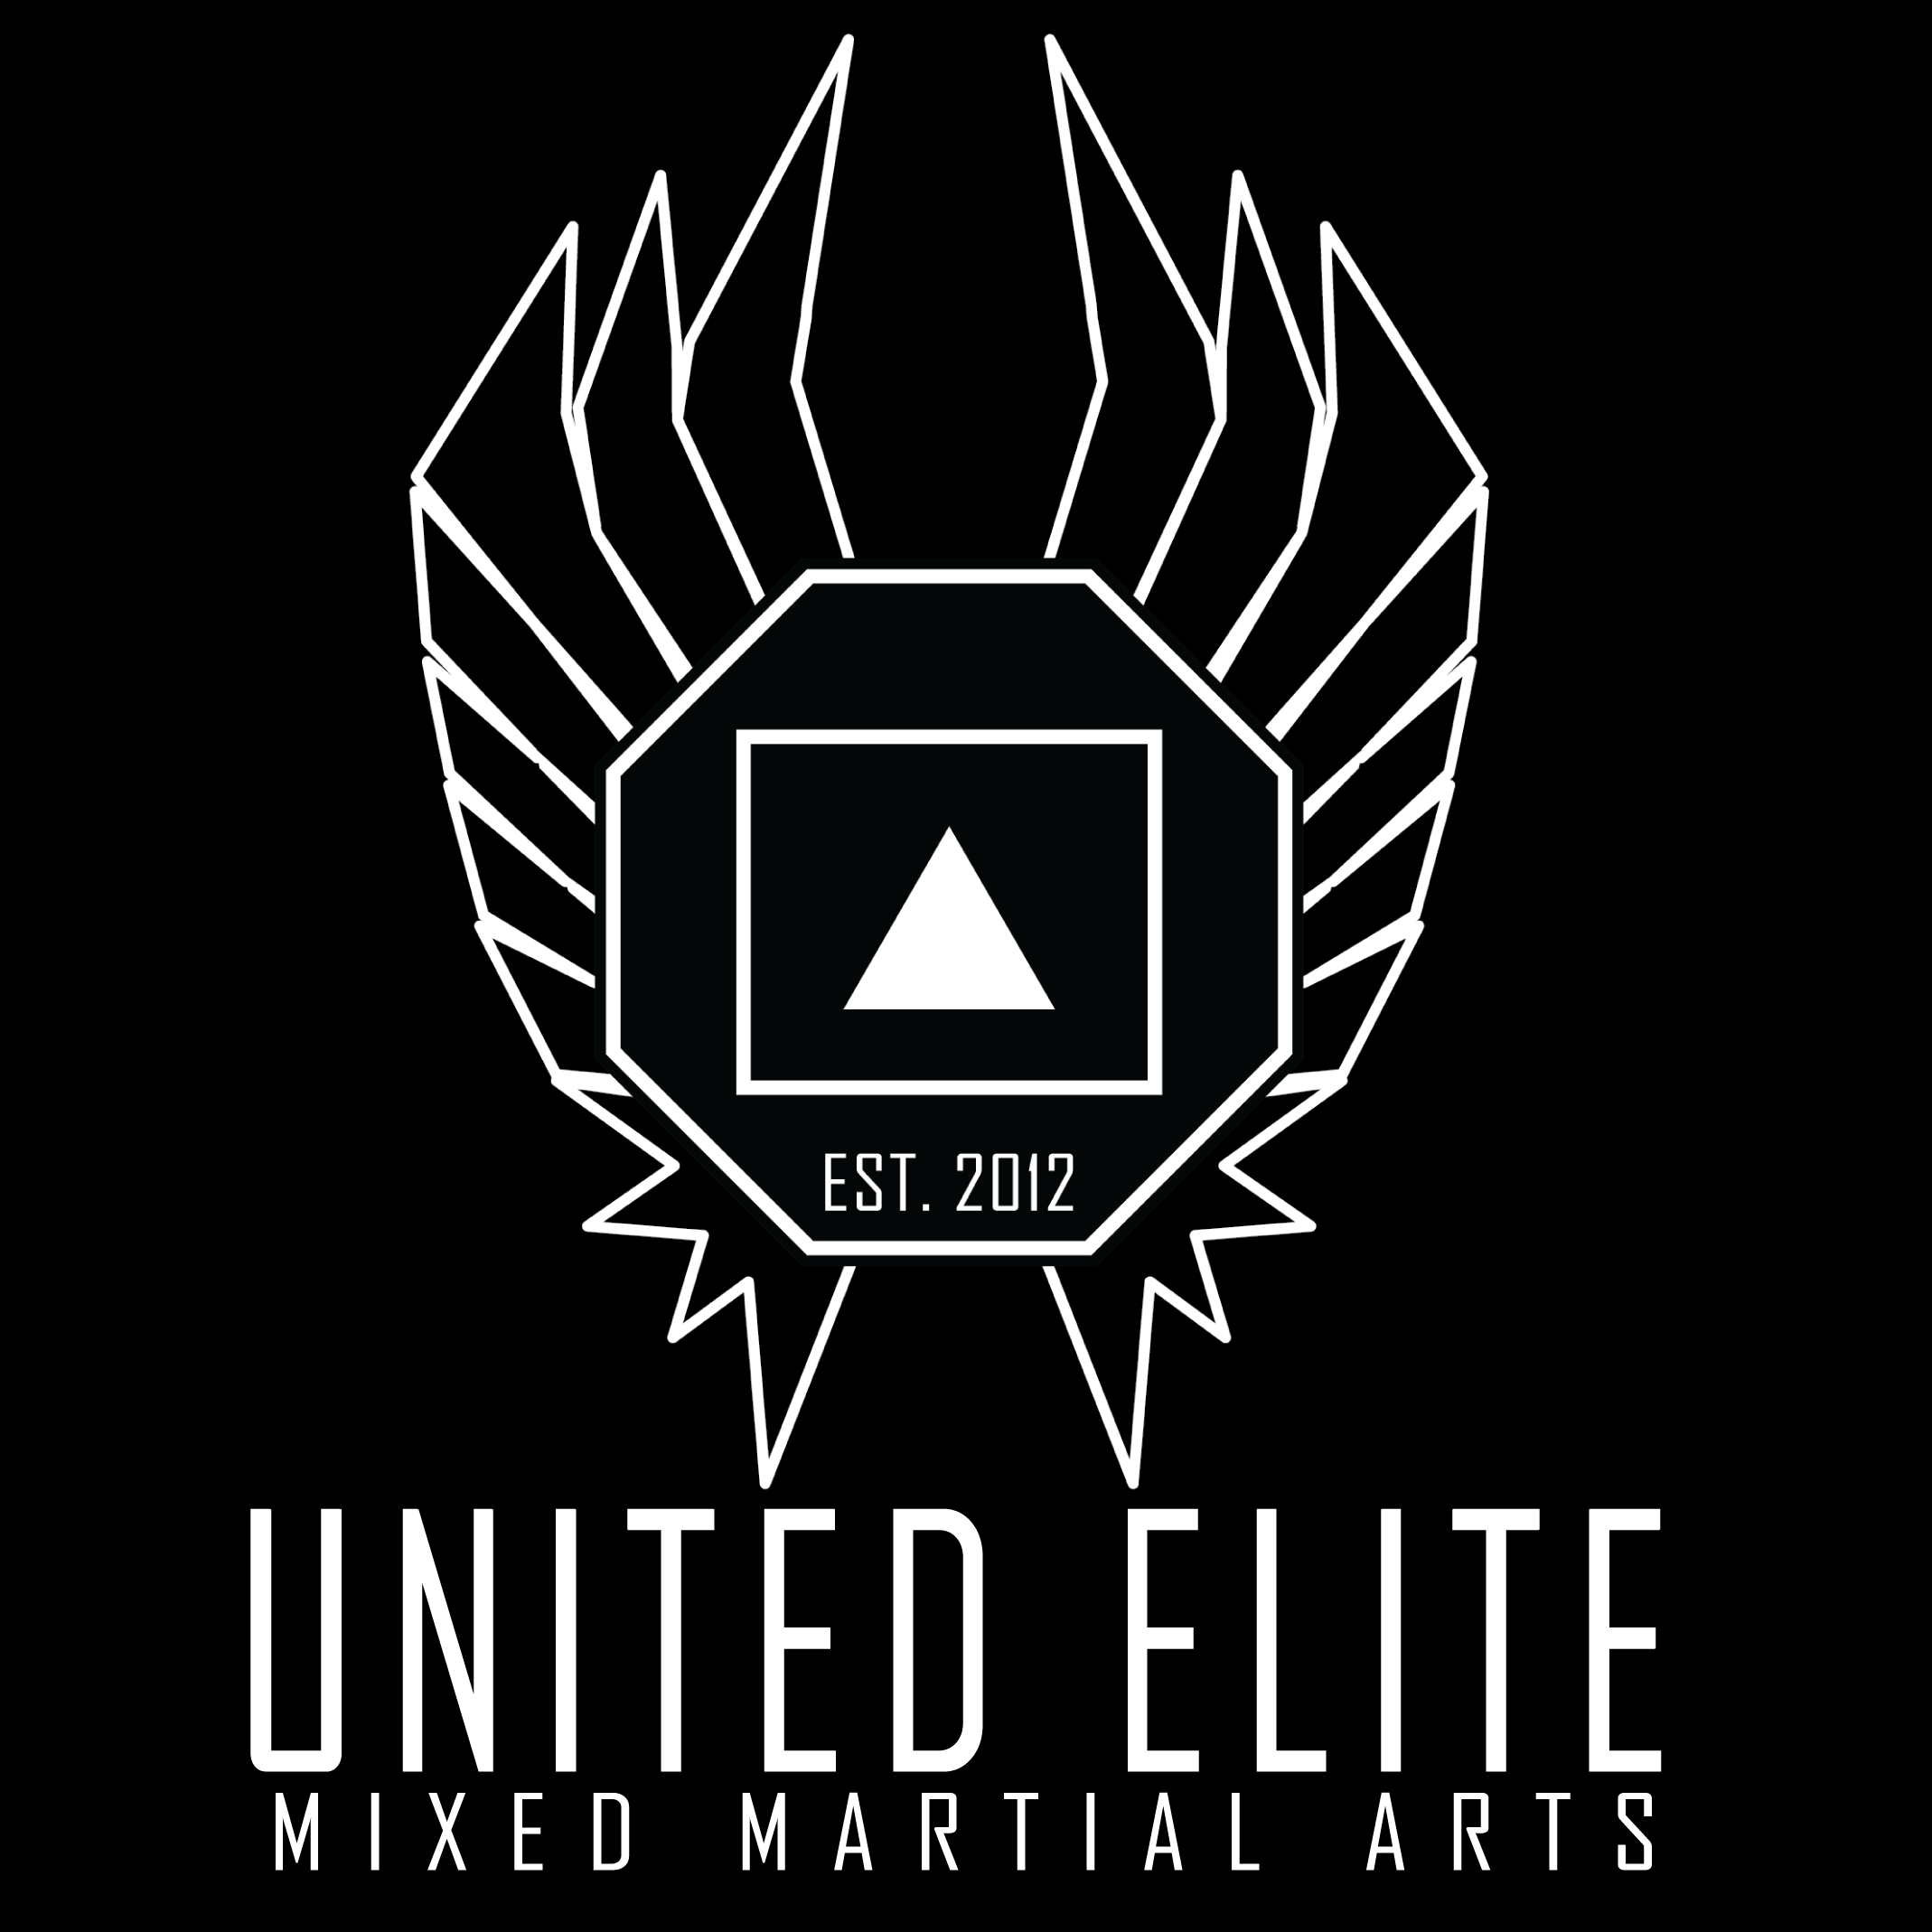 About - United Elite MMA